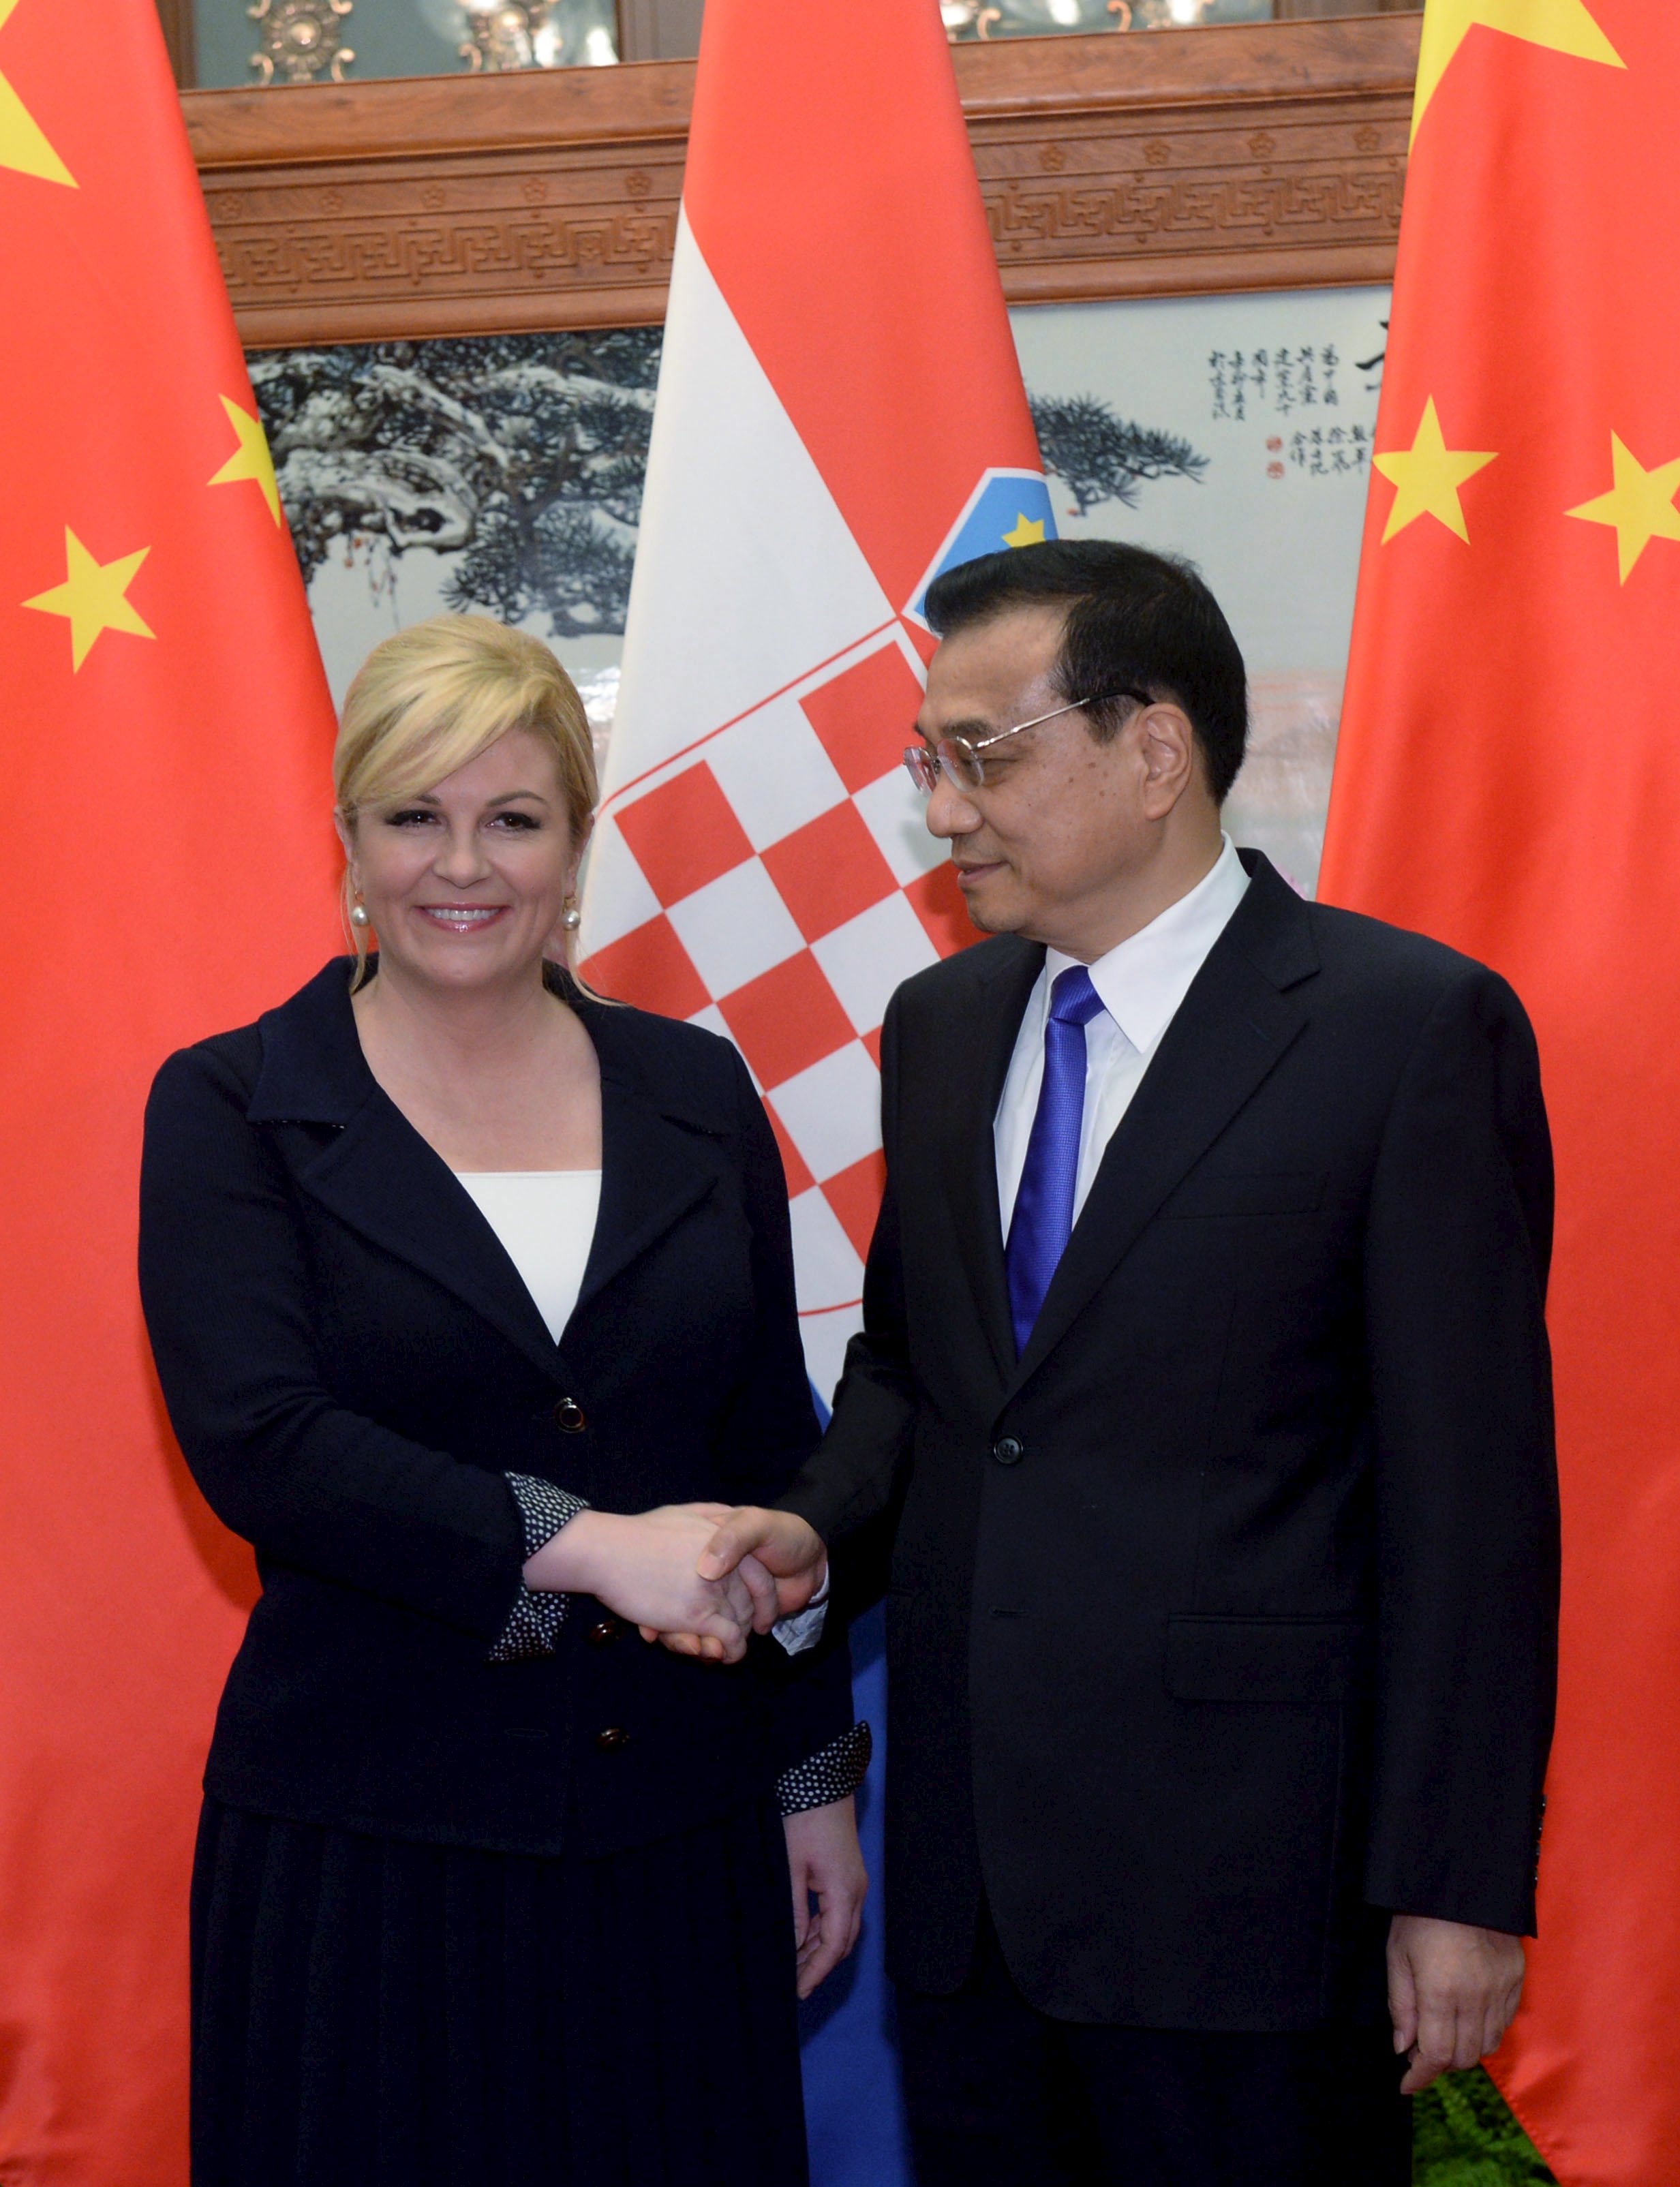 Chinese Premier Li Keqiang (R) shakes hands with Croatian President Kolinda Grabar-Kitarovic before their meeting at the Great Hall of the People in Beijing, China, October 15, 2015. REUTERS/Parker Song/Pool